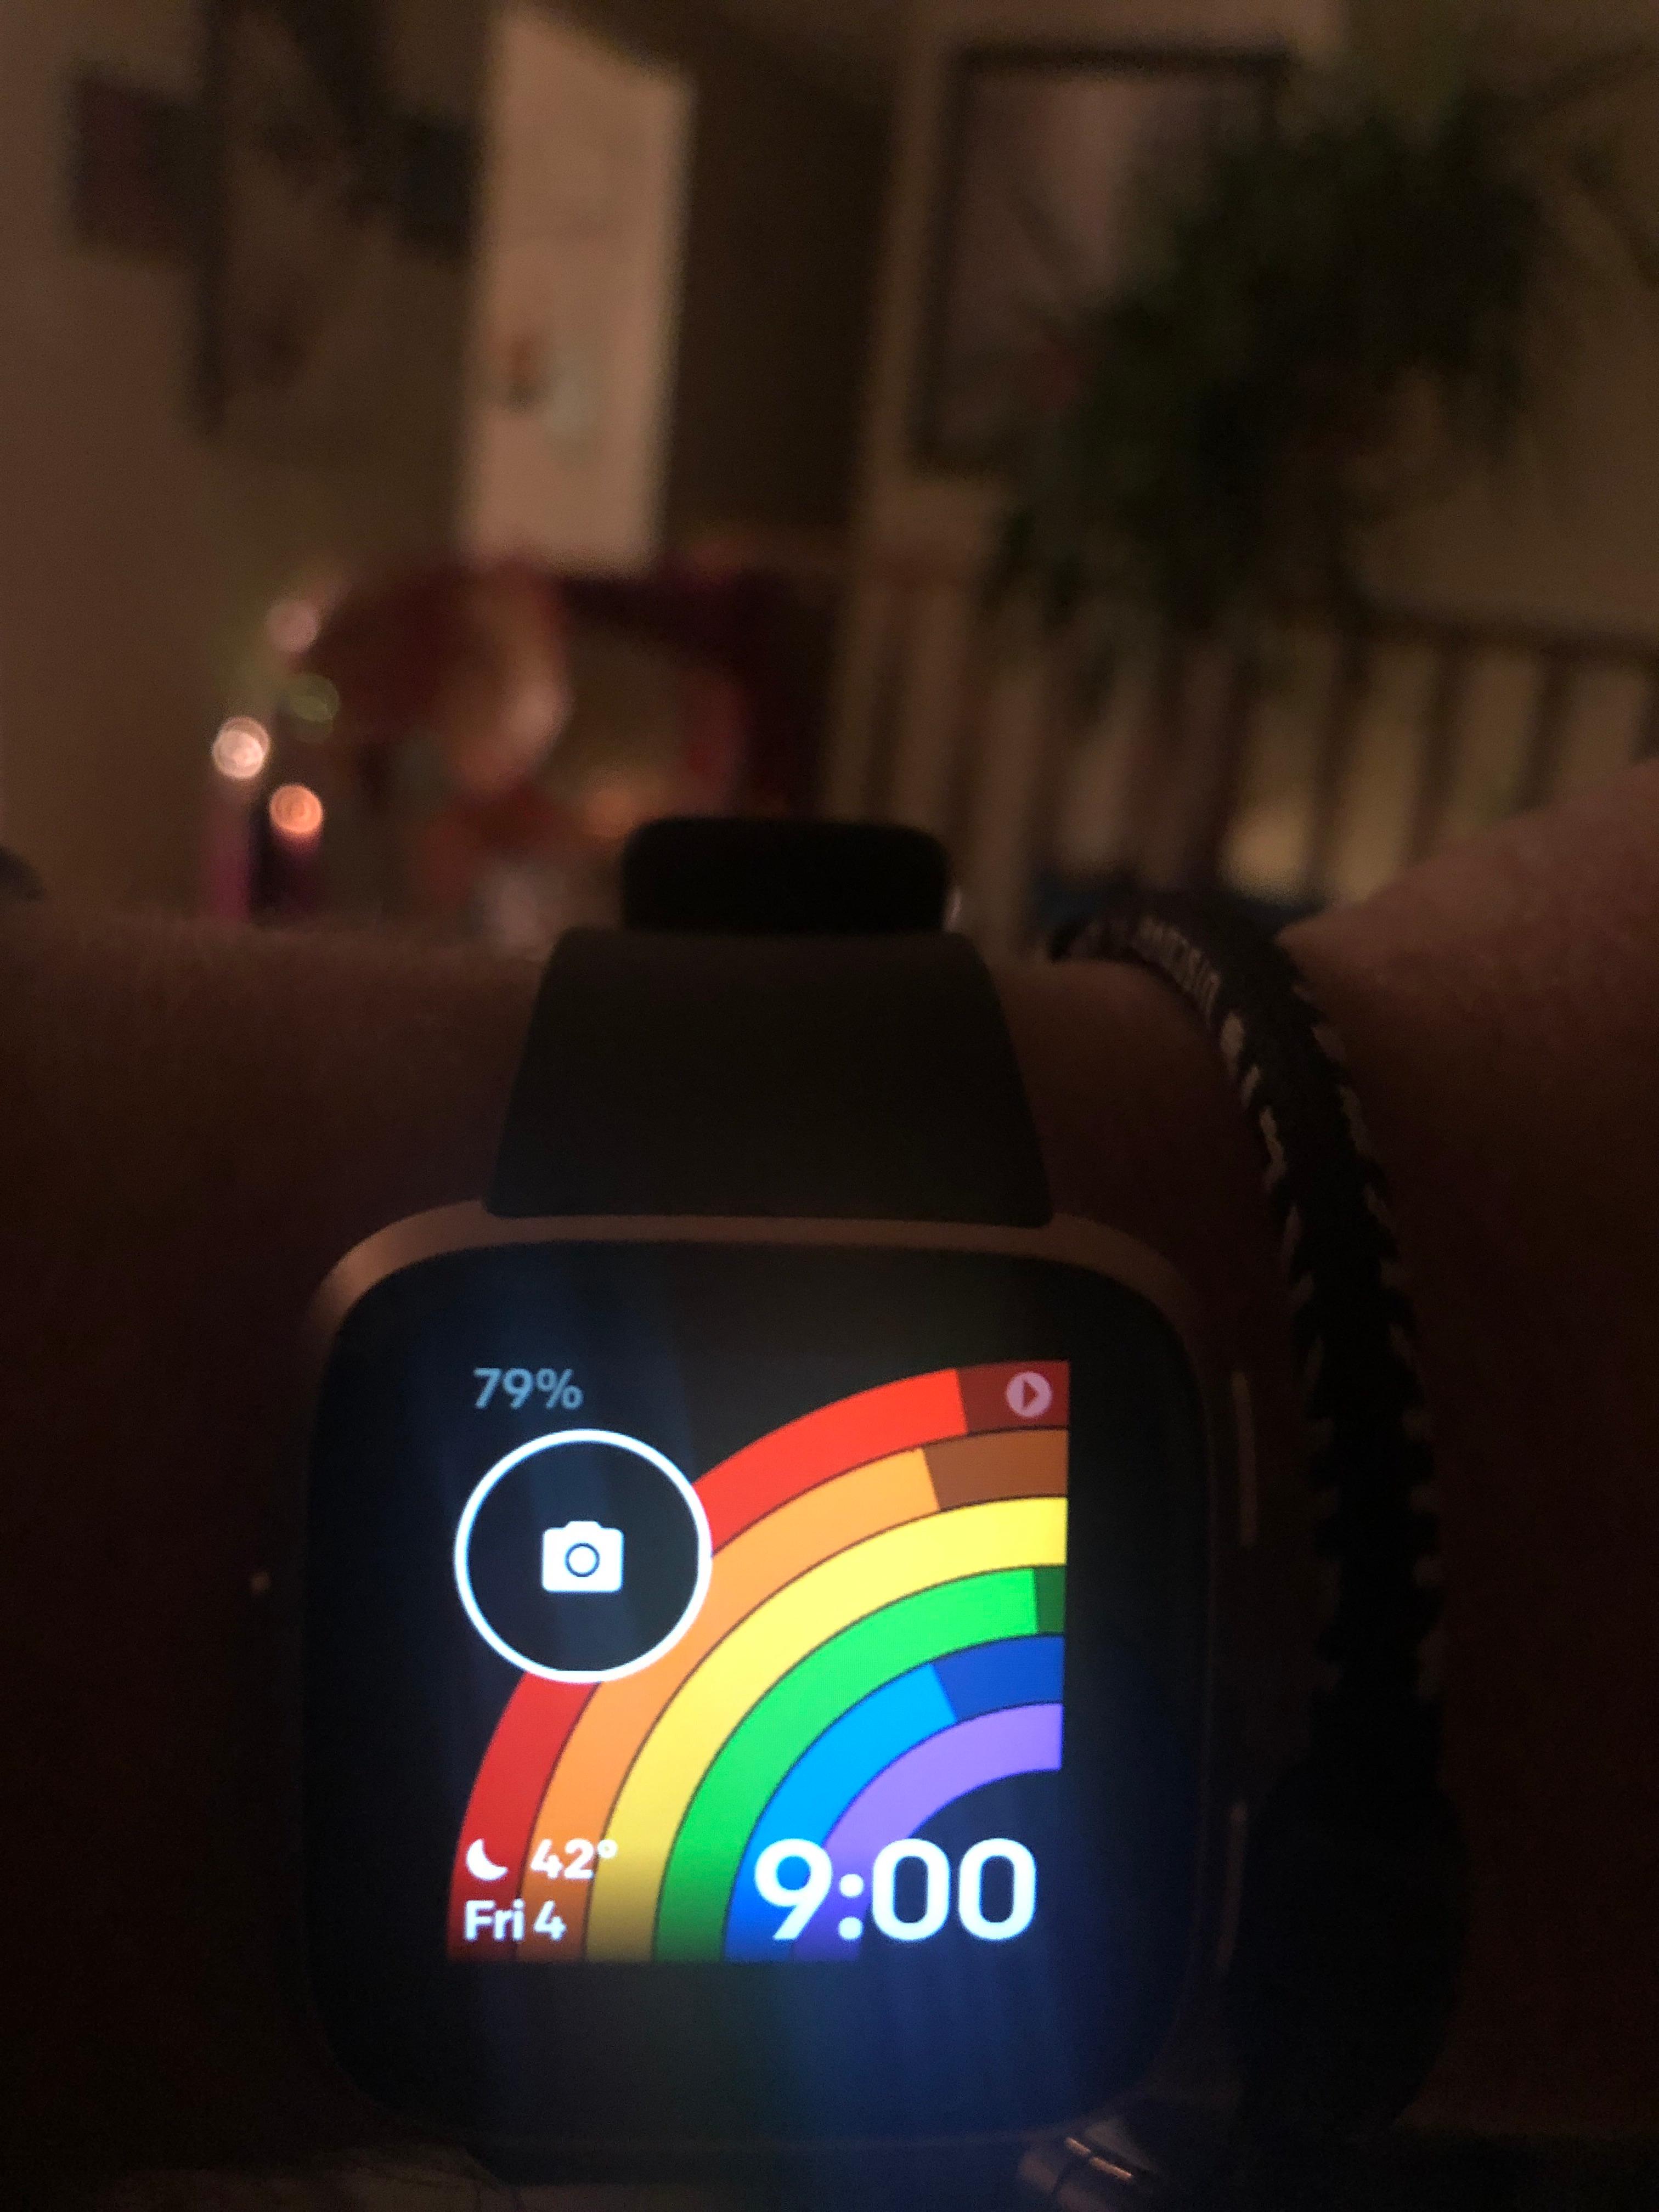 Camera icon on face of versa - Fitbit 